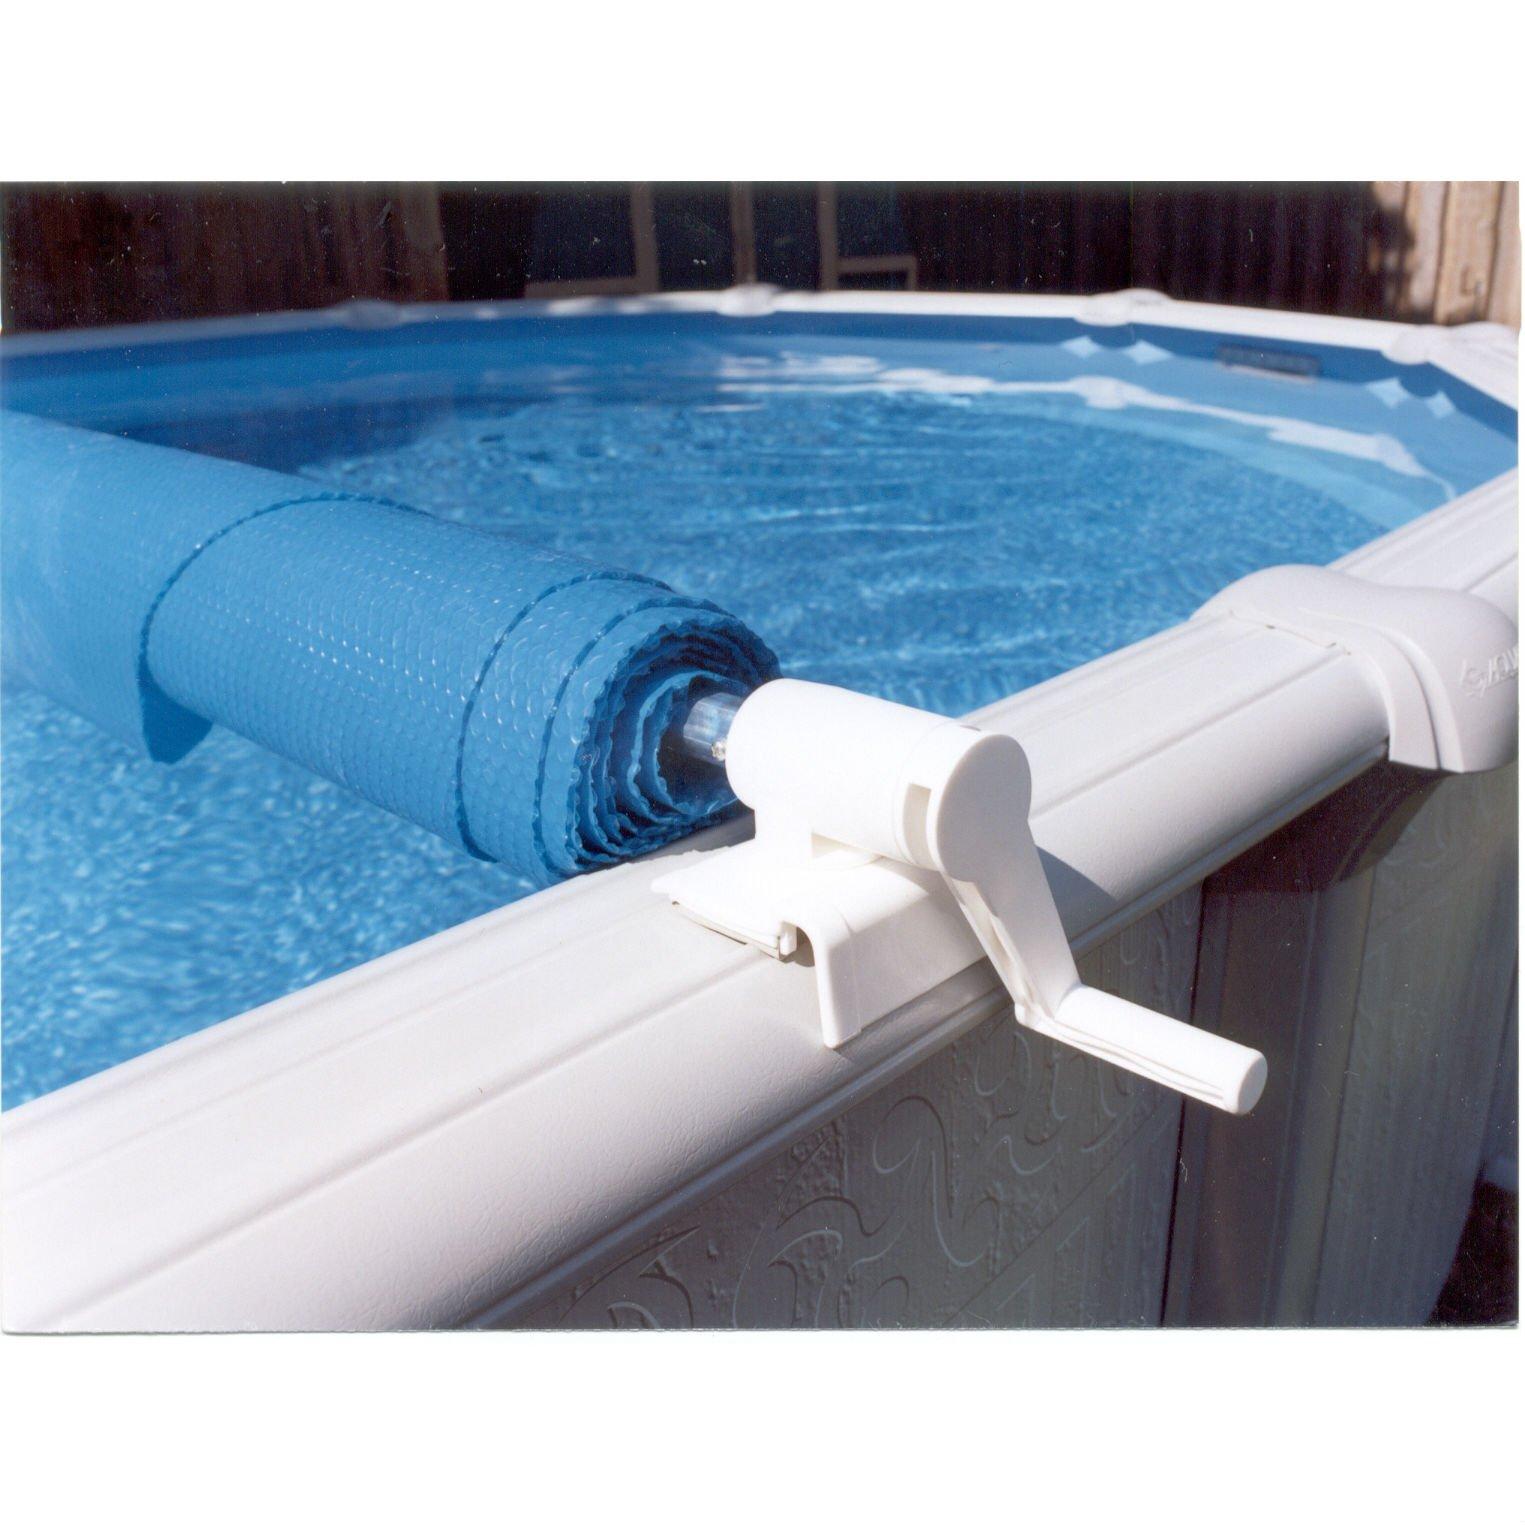 Feherguard  FG-SRE-SR24 Surface Rider Above Ground Solar Cover Reel (Pools up to 24')